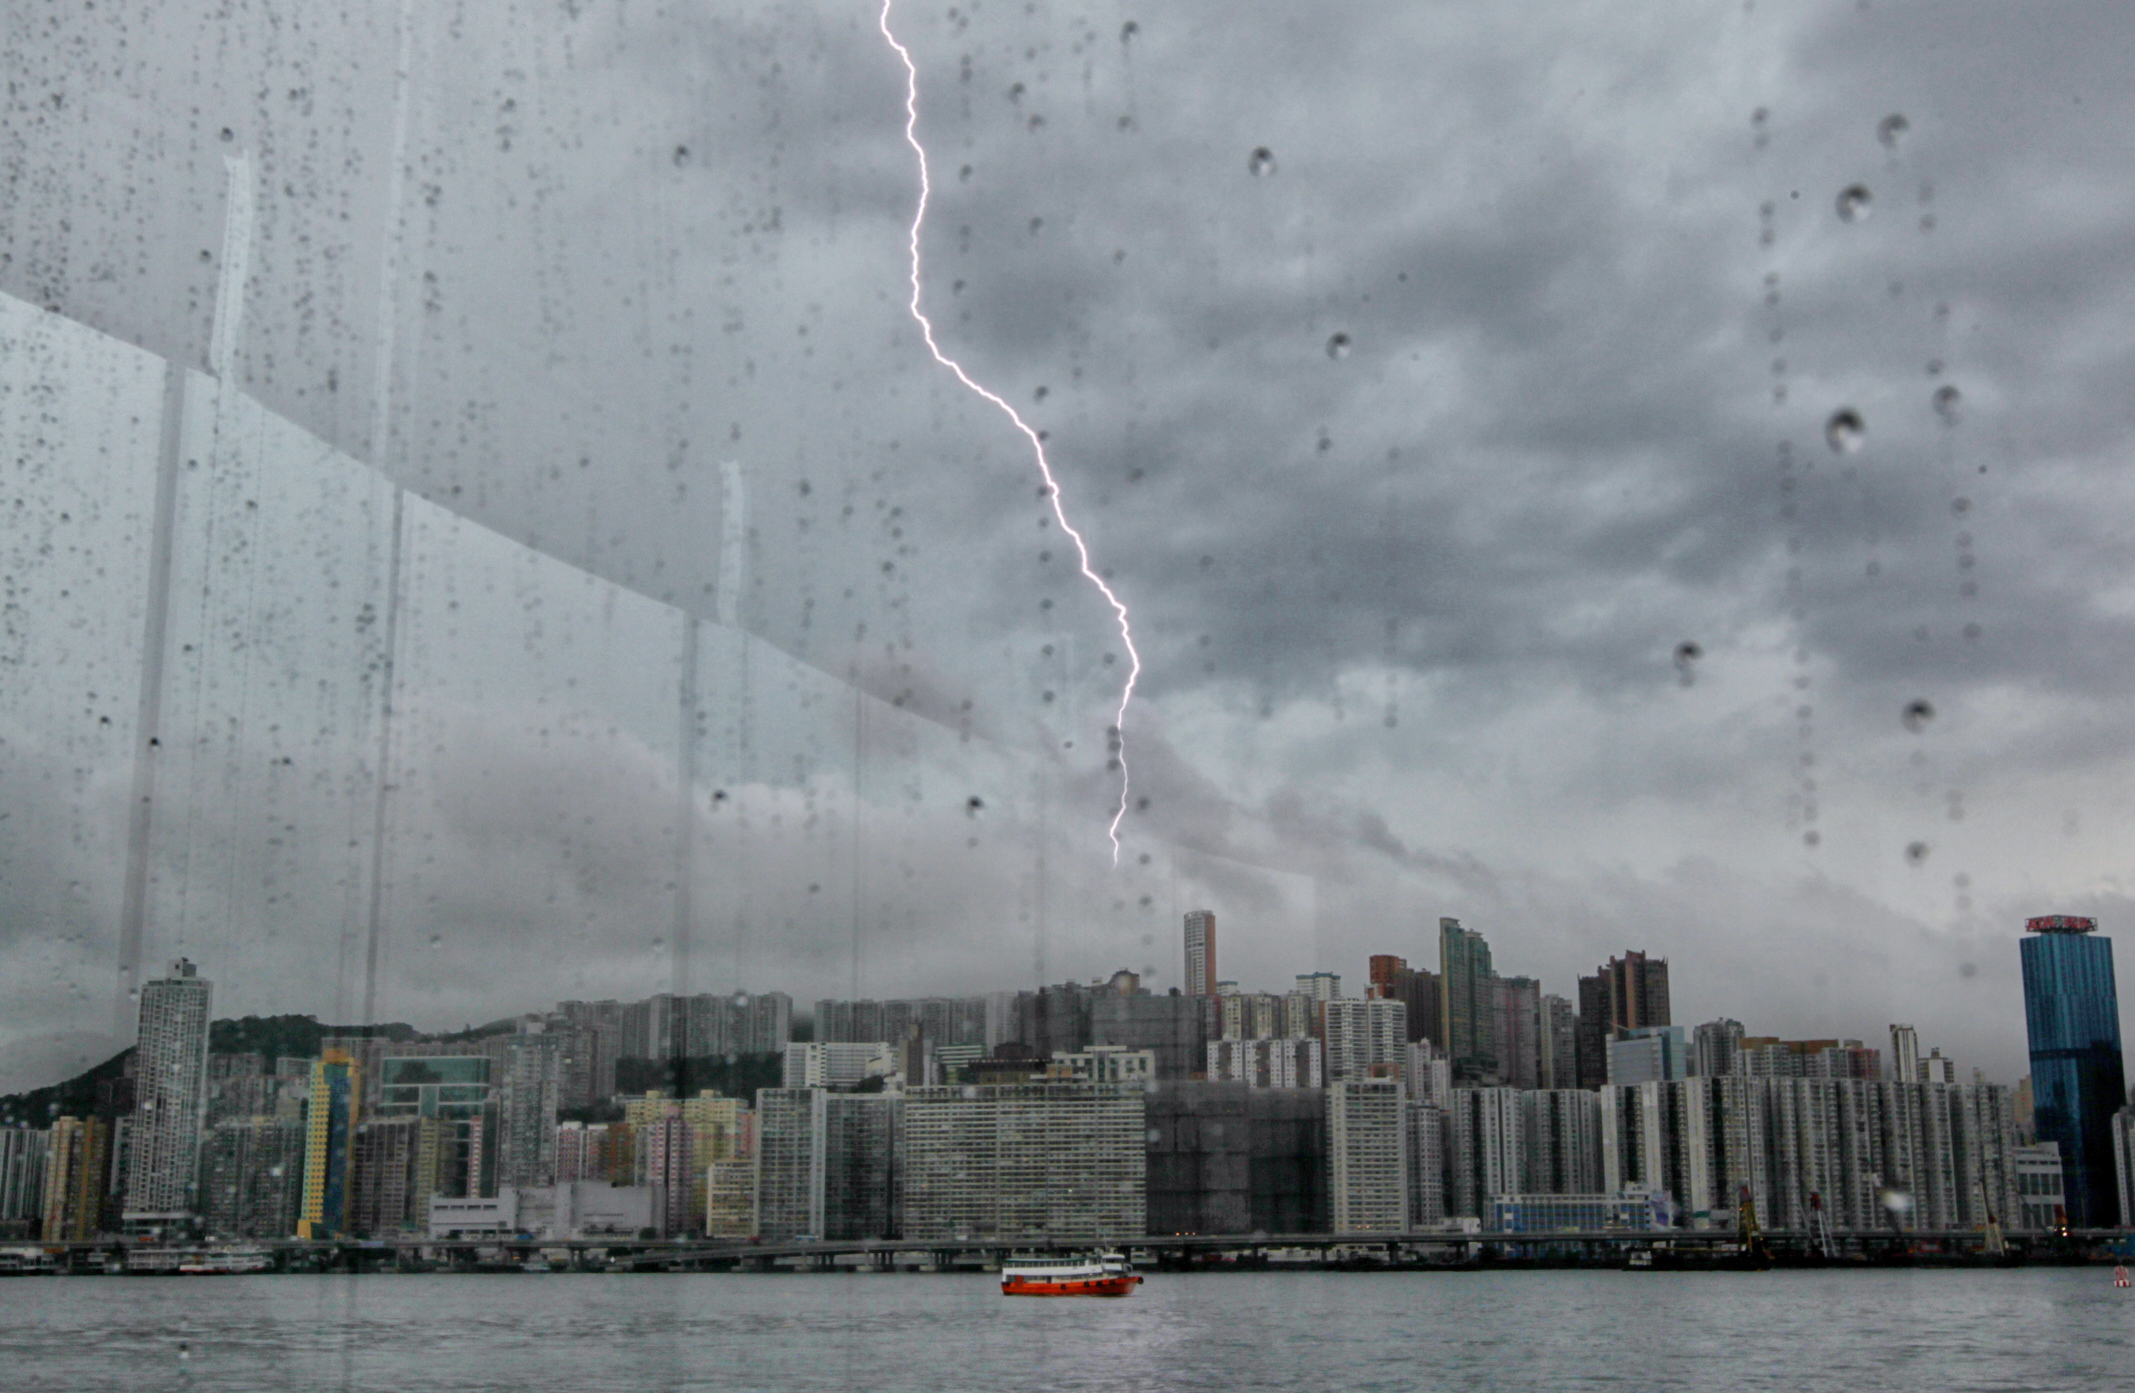 Lightning over North Point on Wednesday. Photo: SCMP/Felix Wong